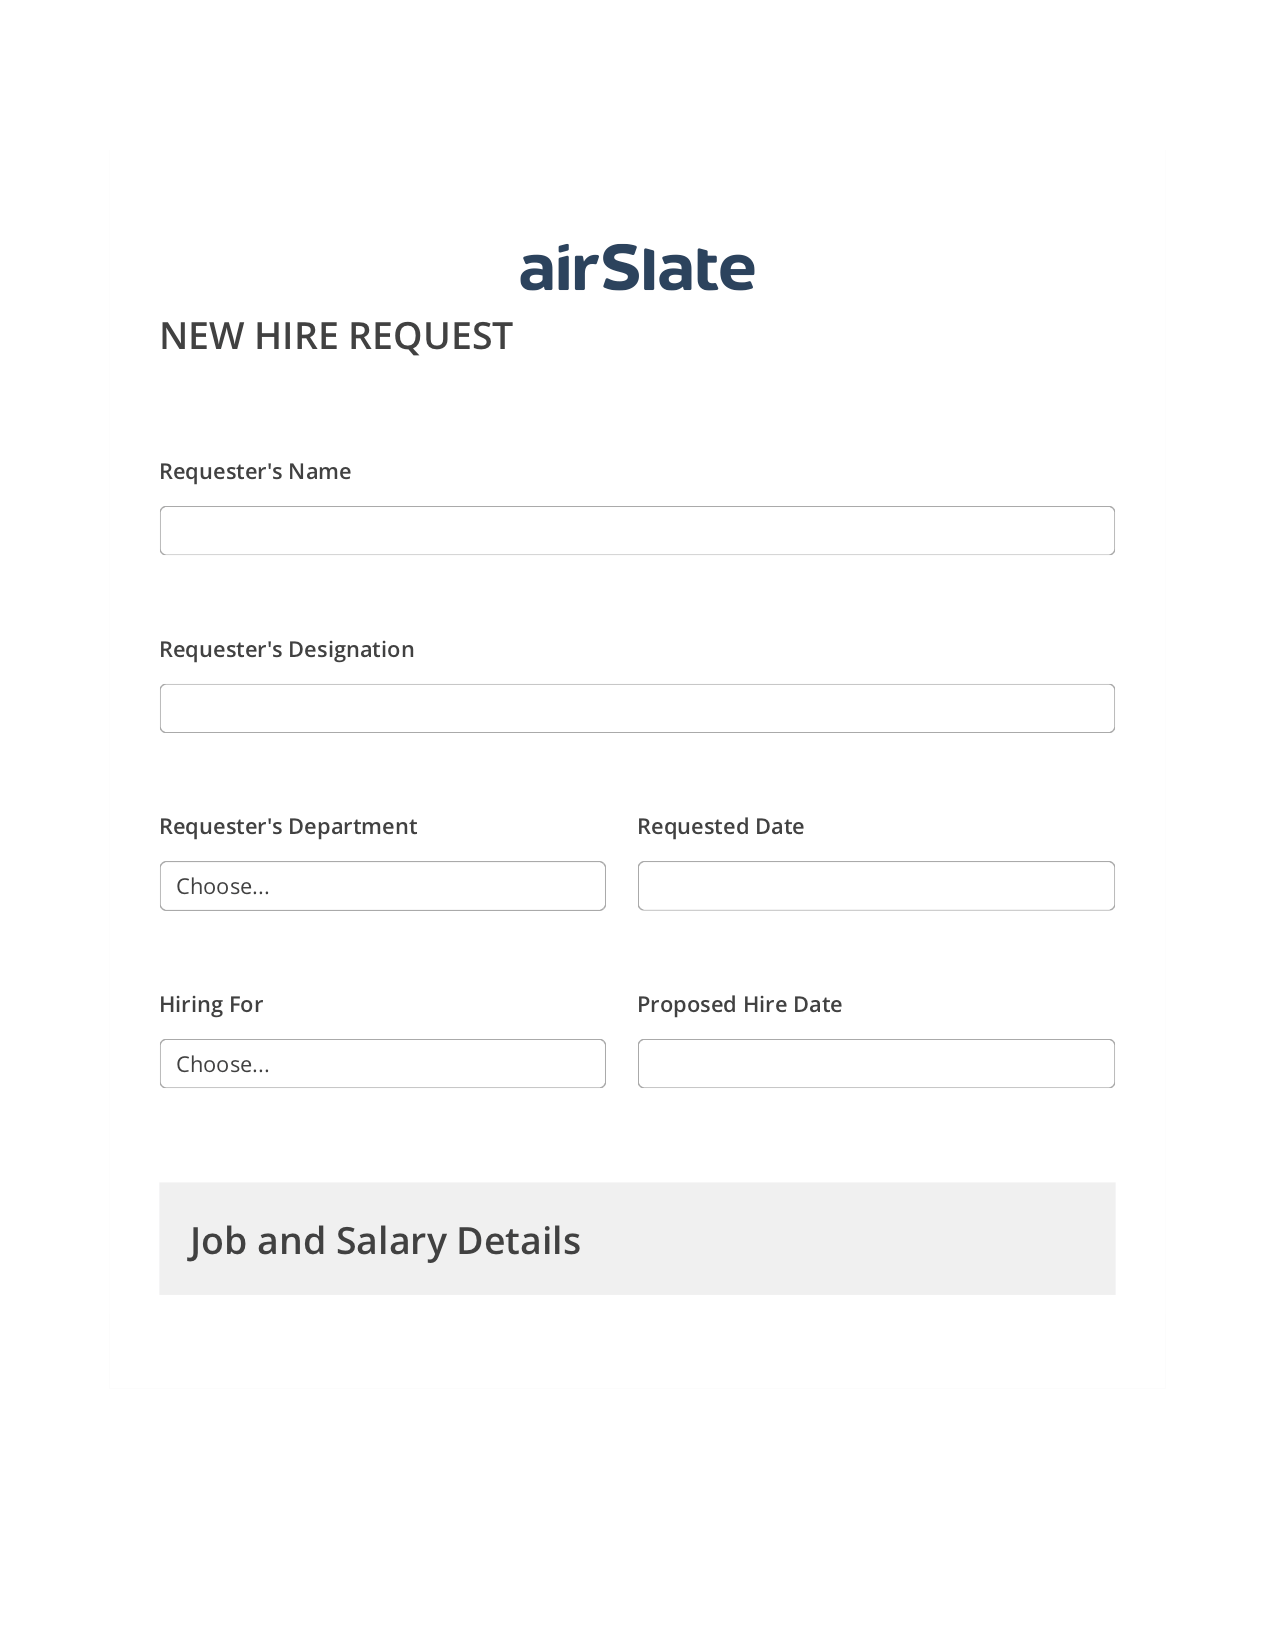 Hiring Request Workflow Pre-fill from CSV File Bot, Add Tags to Slate Bot, Slack Two-Way Binding Bot